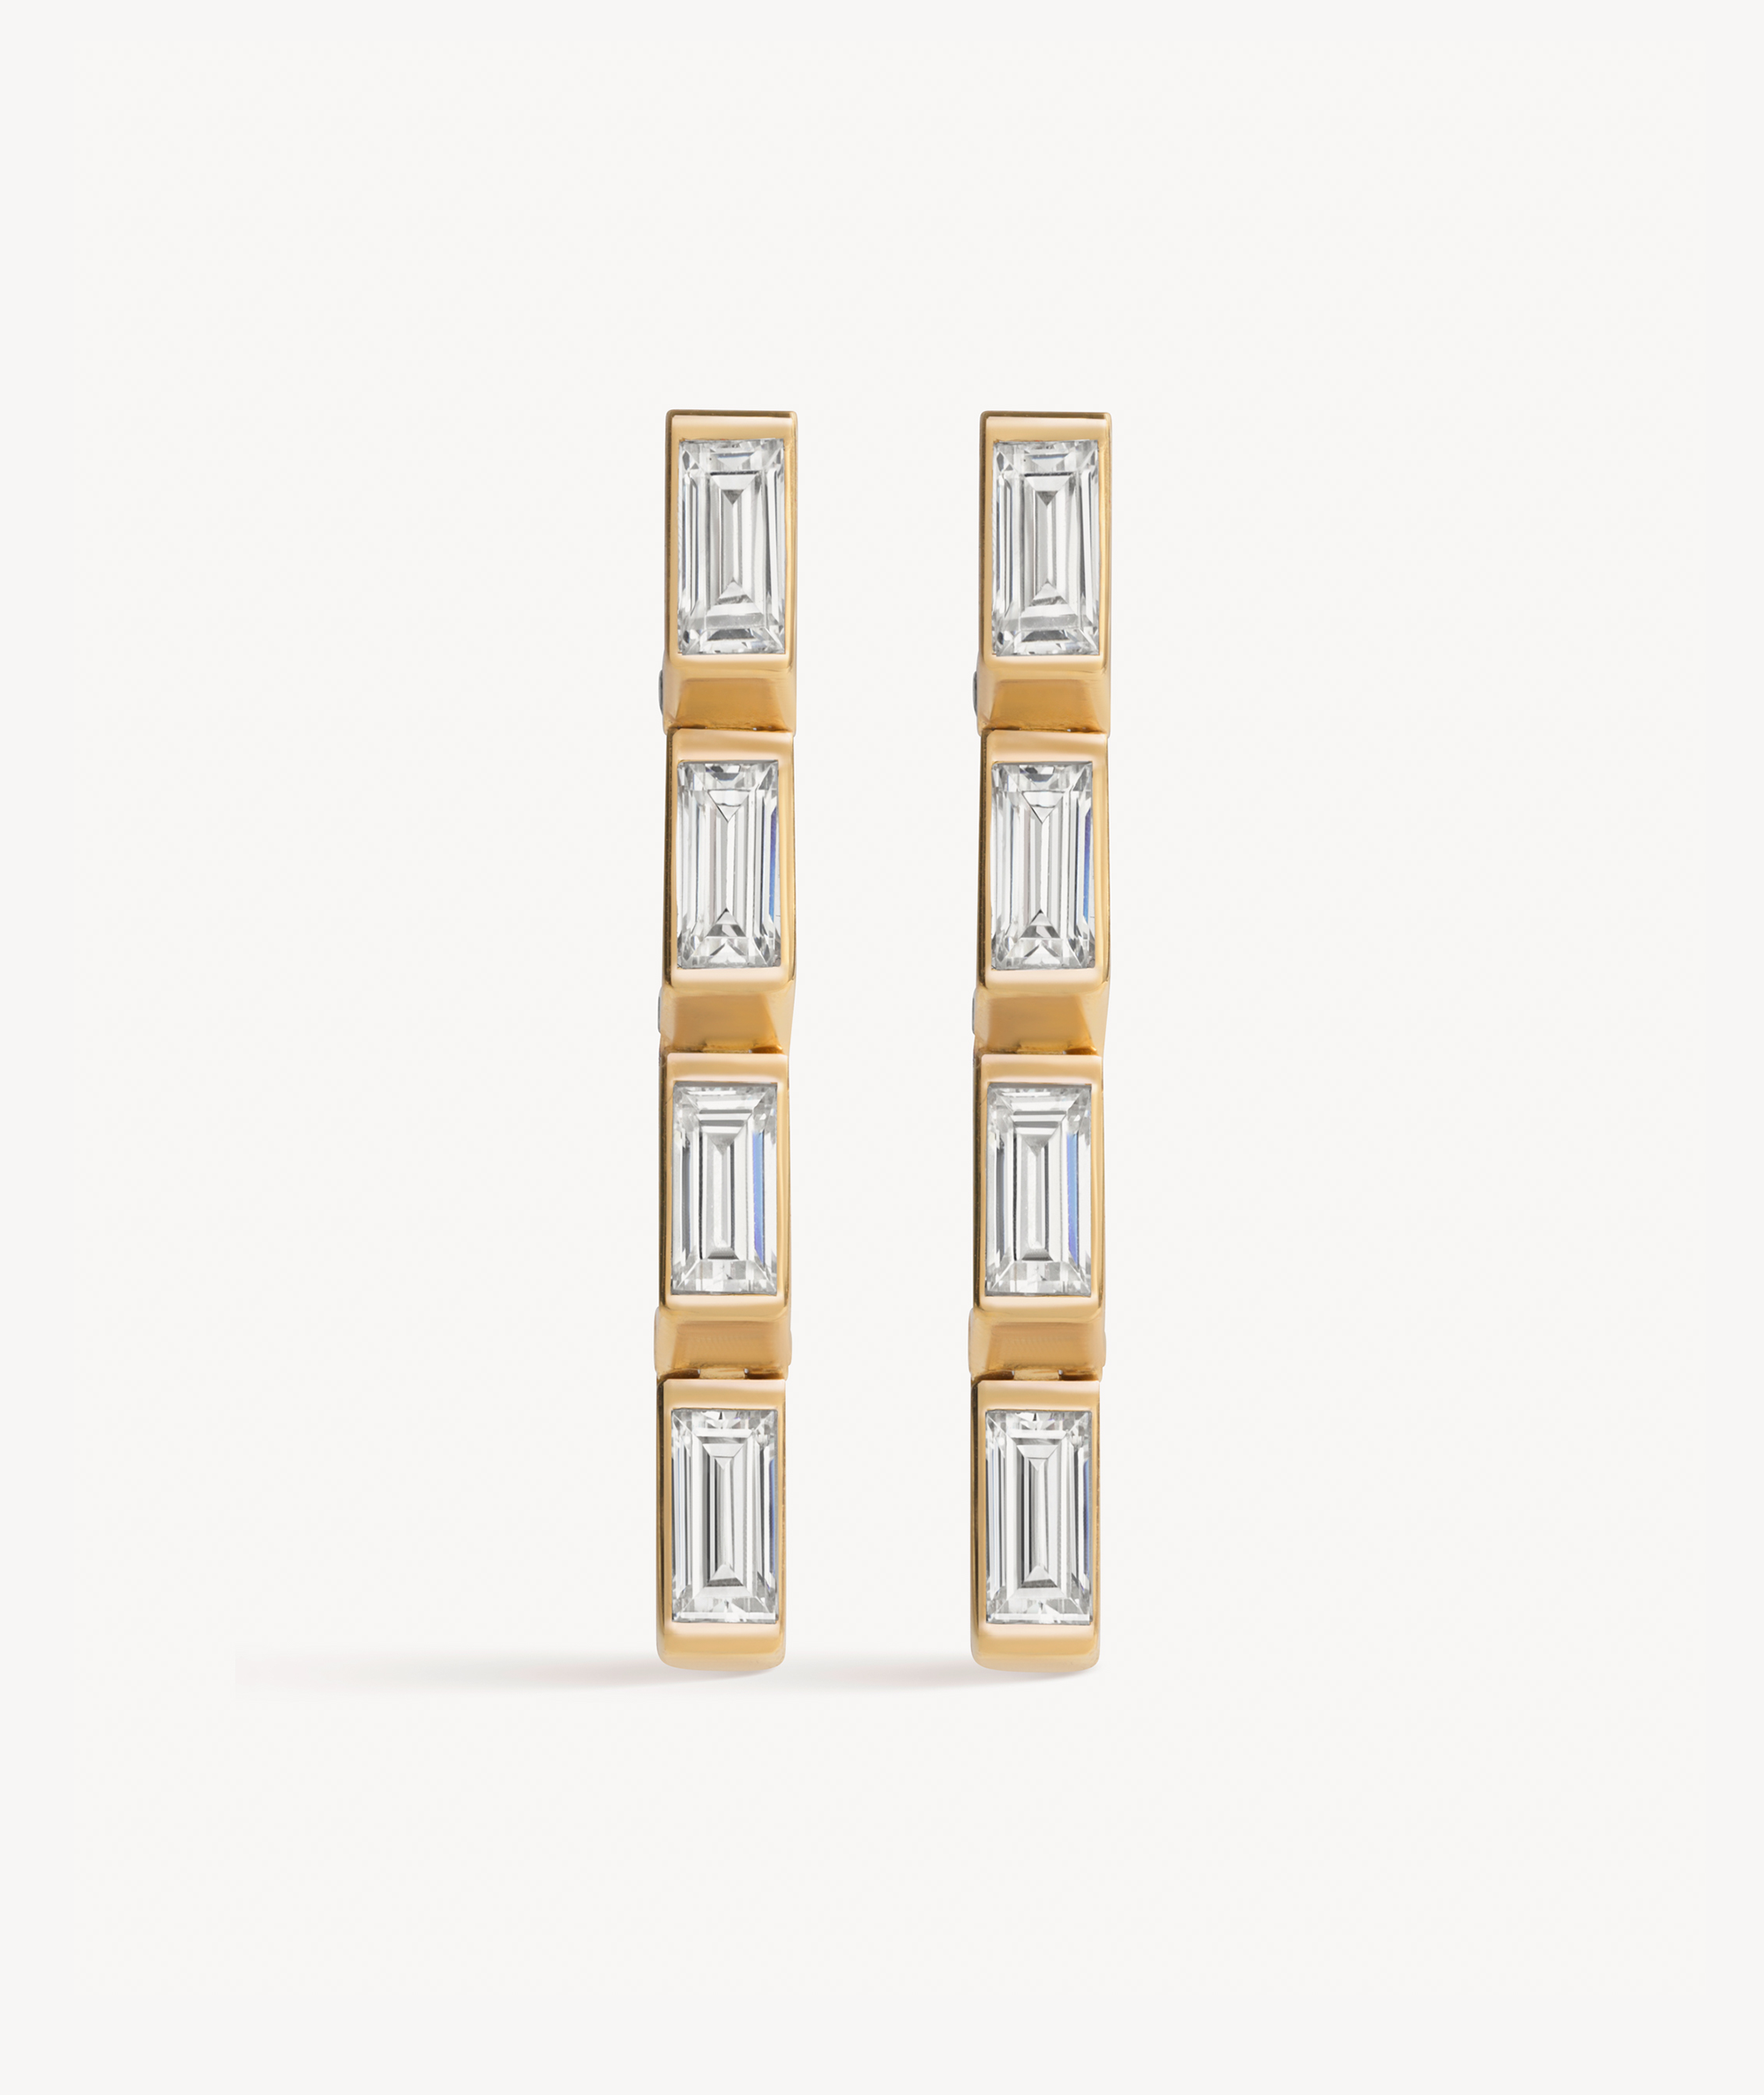 EREDE earrings in 18k recycled yellow gold and lab-grown diamonds.